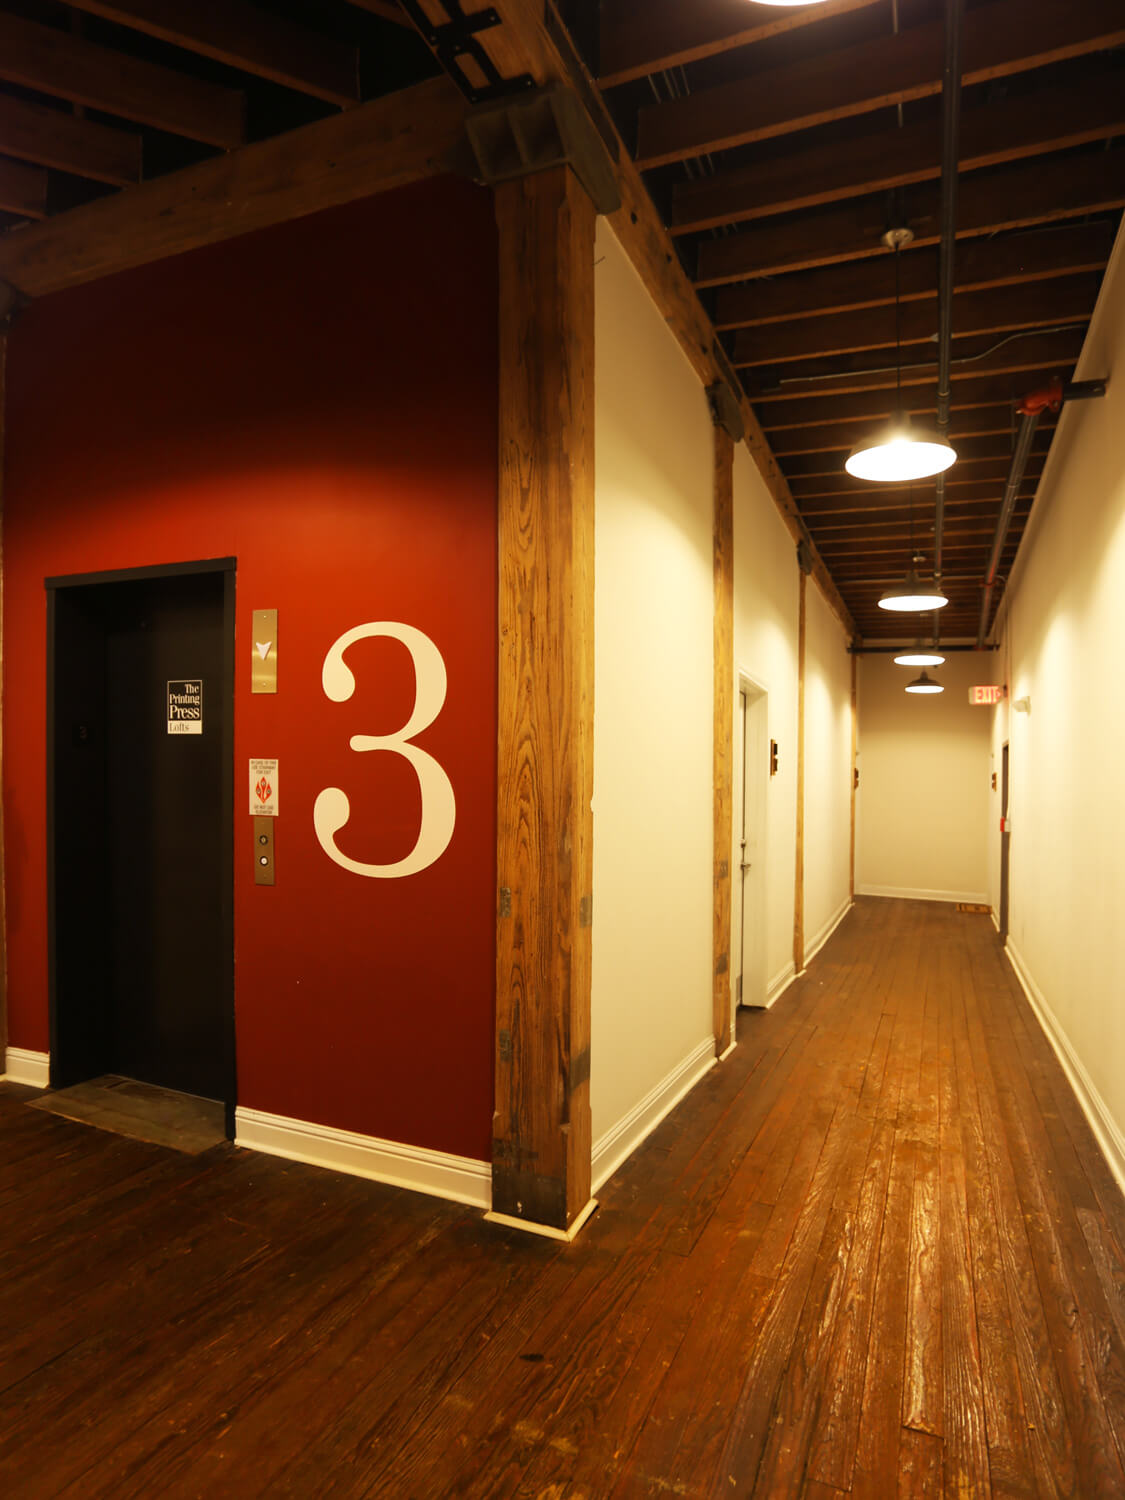 Printing Press Lofts Designed by Foshee Architecture – View of Third Floor Elevator Lobby